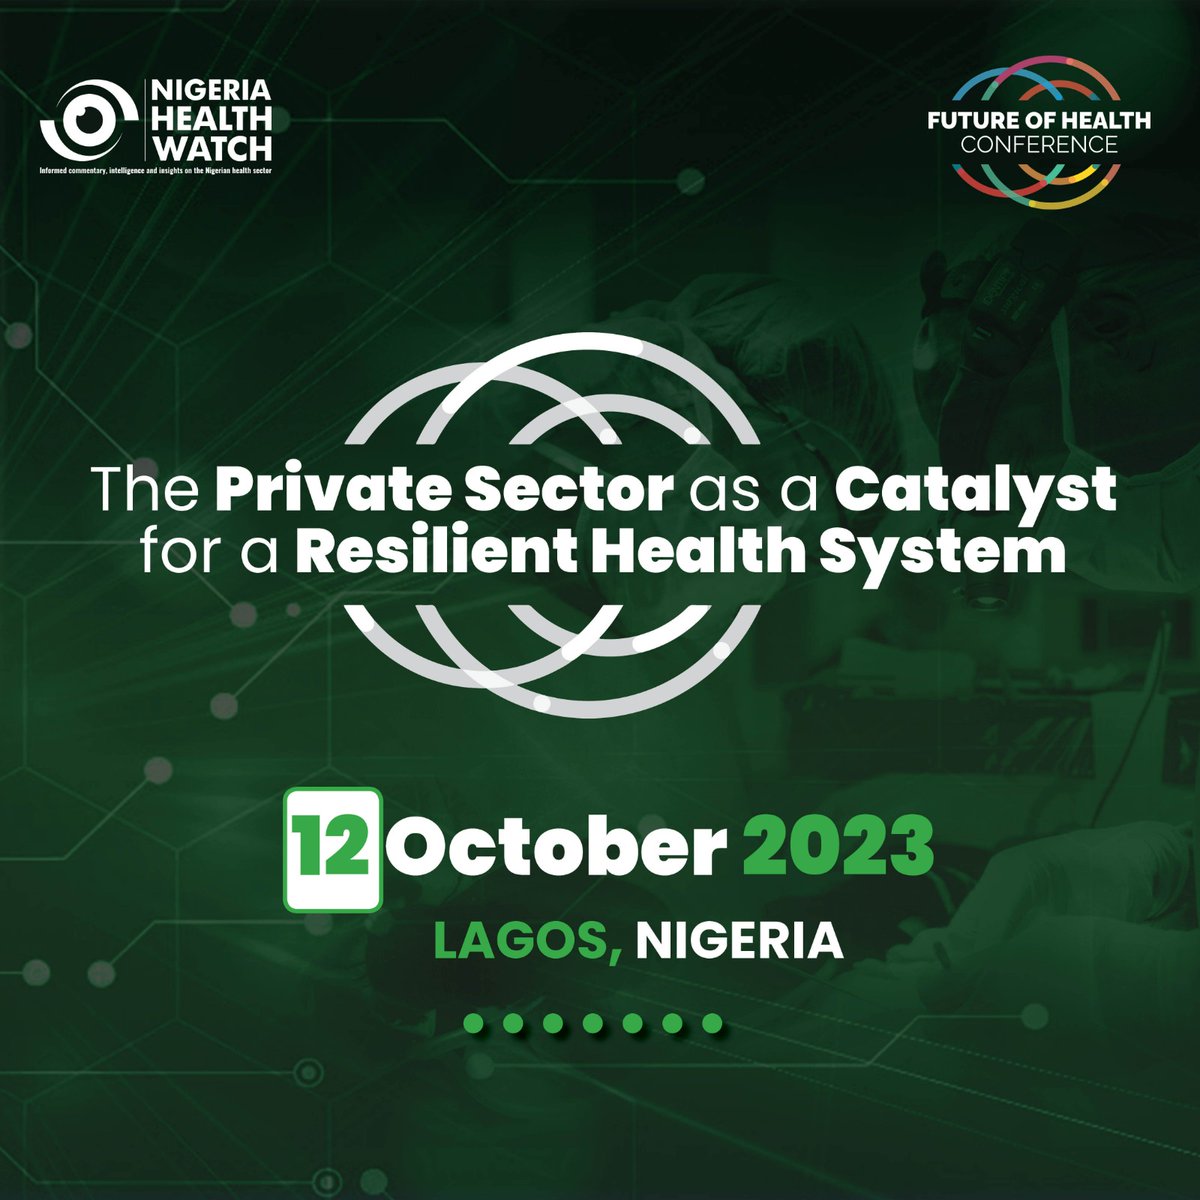 @muhammadpate @yates_rob @Shell_Nigeria @HygeiaHMO_ @nmanigeria @hfn_nigeria @LagoonHospitals @MedicalworldNig The 2023 Future of Health Conference, themed: The Private Sector as a Catalyst for a Resilient Health System promises to be another high-level platform to discuss the factors that can strengthen the Nigerian health system.

Join us in #Lagos: futureofhealthconference.com
#PS4HealthNG